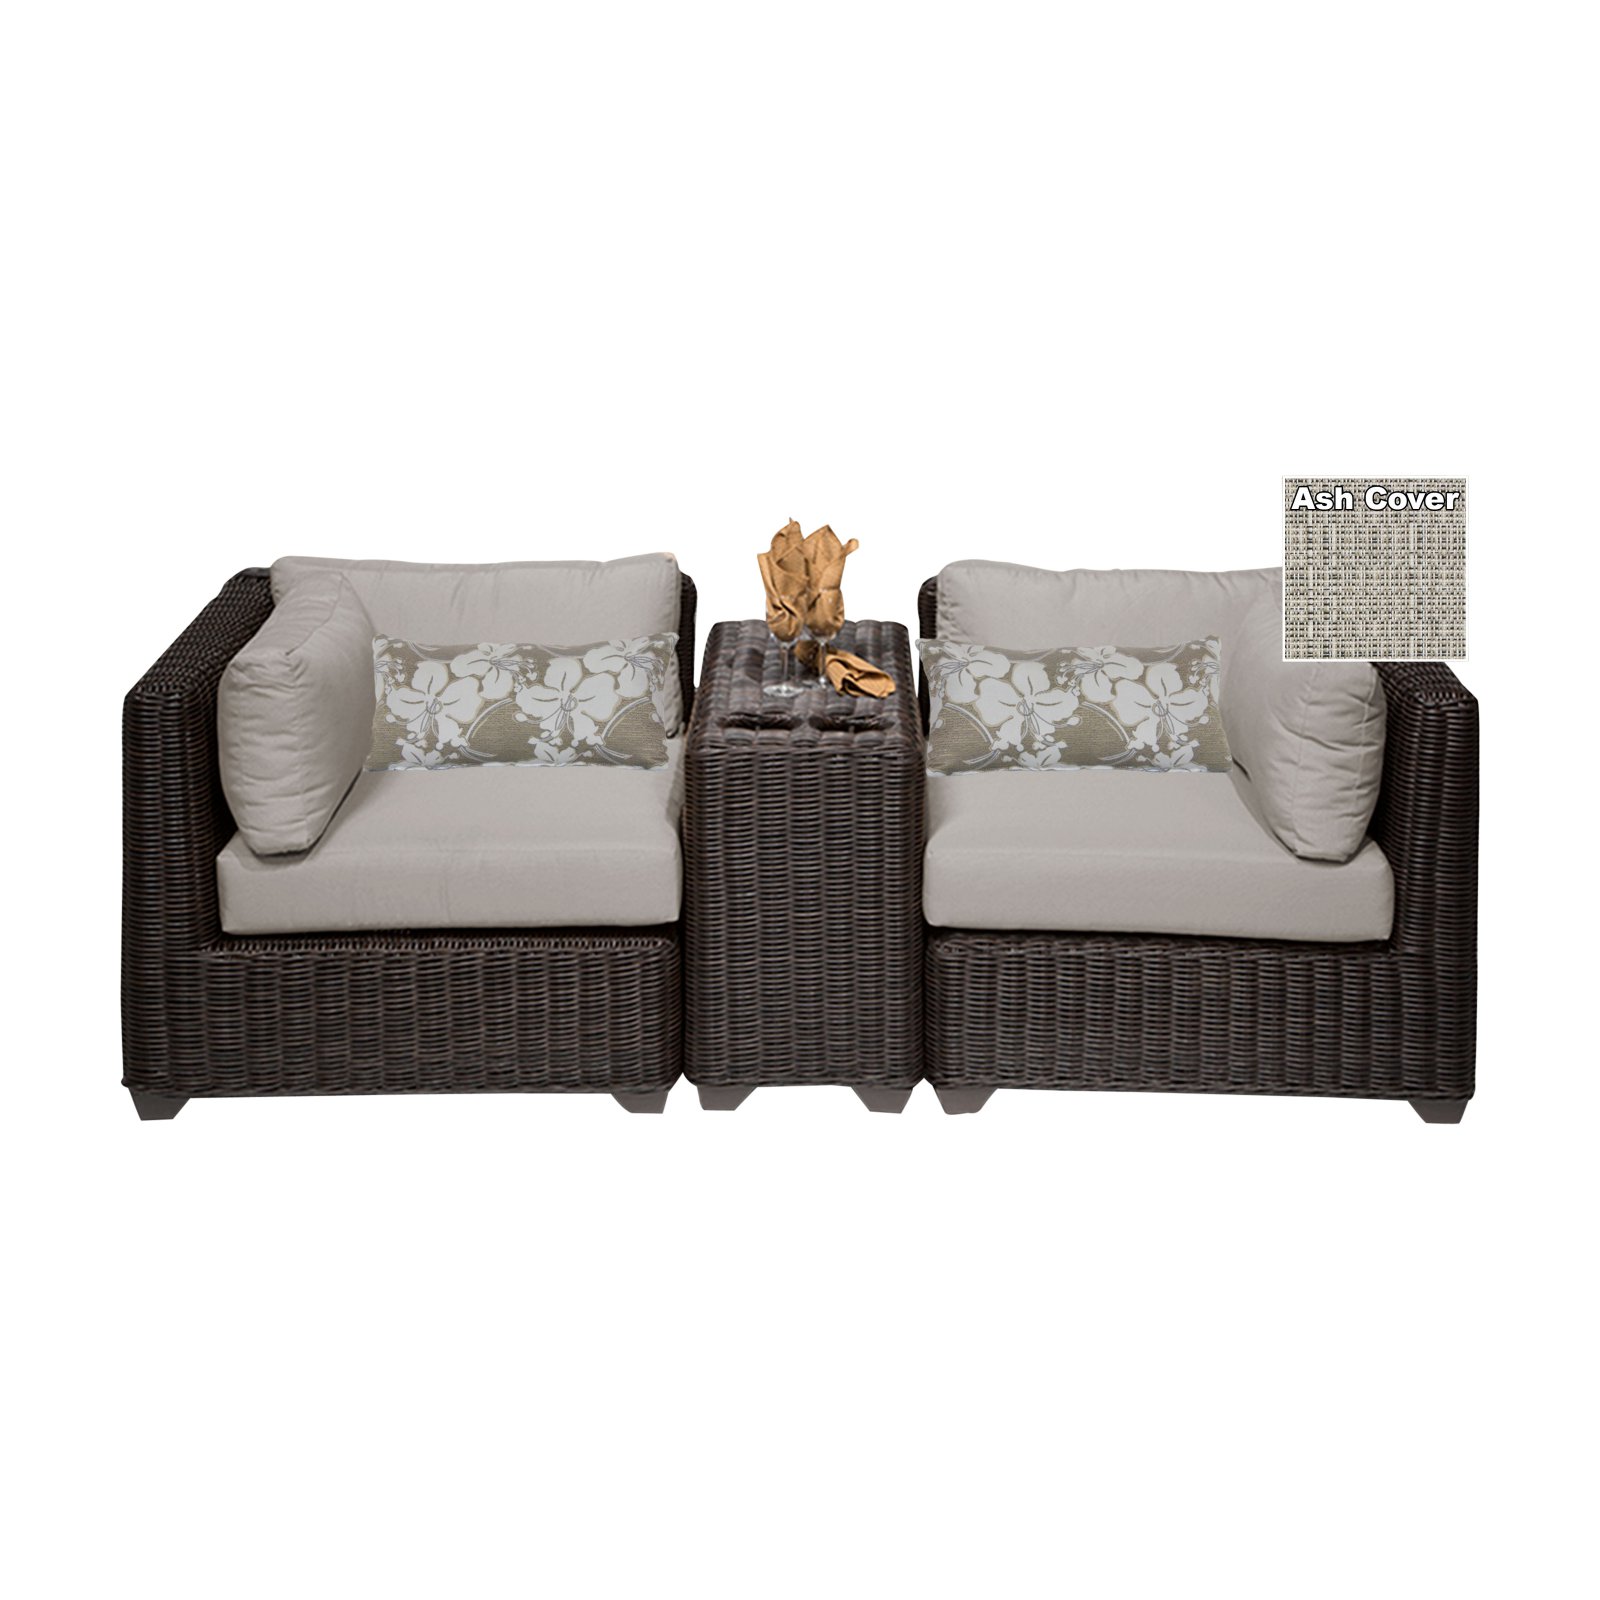 TK Classics Venice Wicker 3 Piece Patio Conversation Set with Cup Table and 2 Sets of Cushion Covers - image 1 of 3